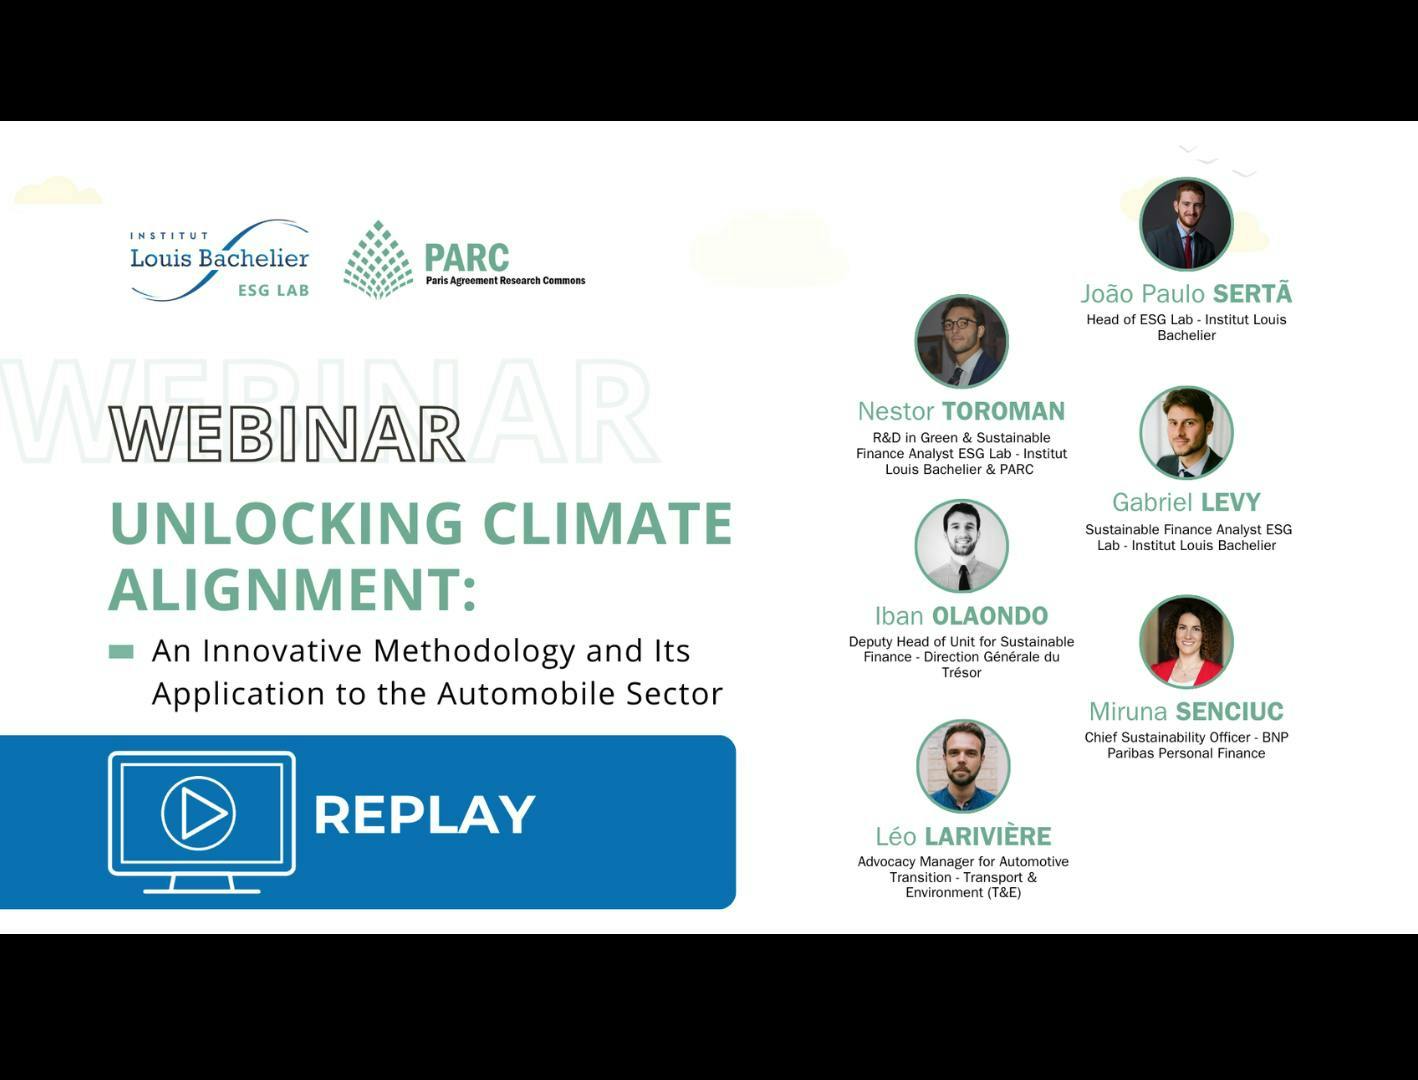 REPLAY  WEBINAR UNLOCKING CLIMATE ALIGNMENT An innovative methodology and its application to the automobile sector